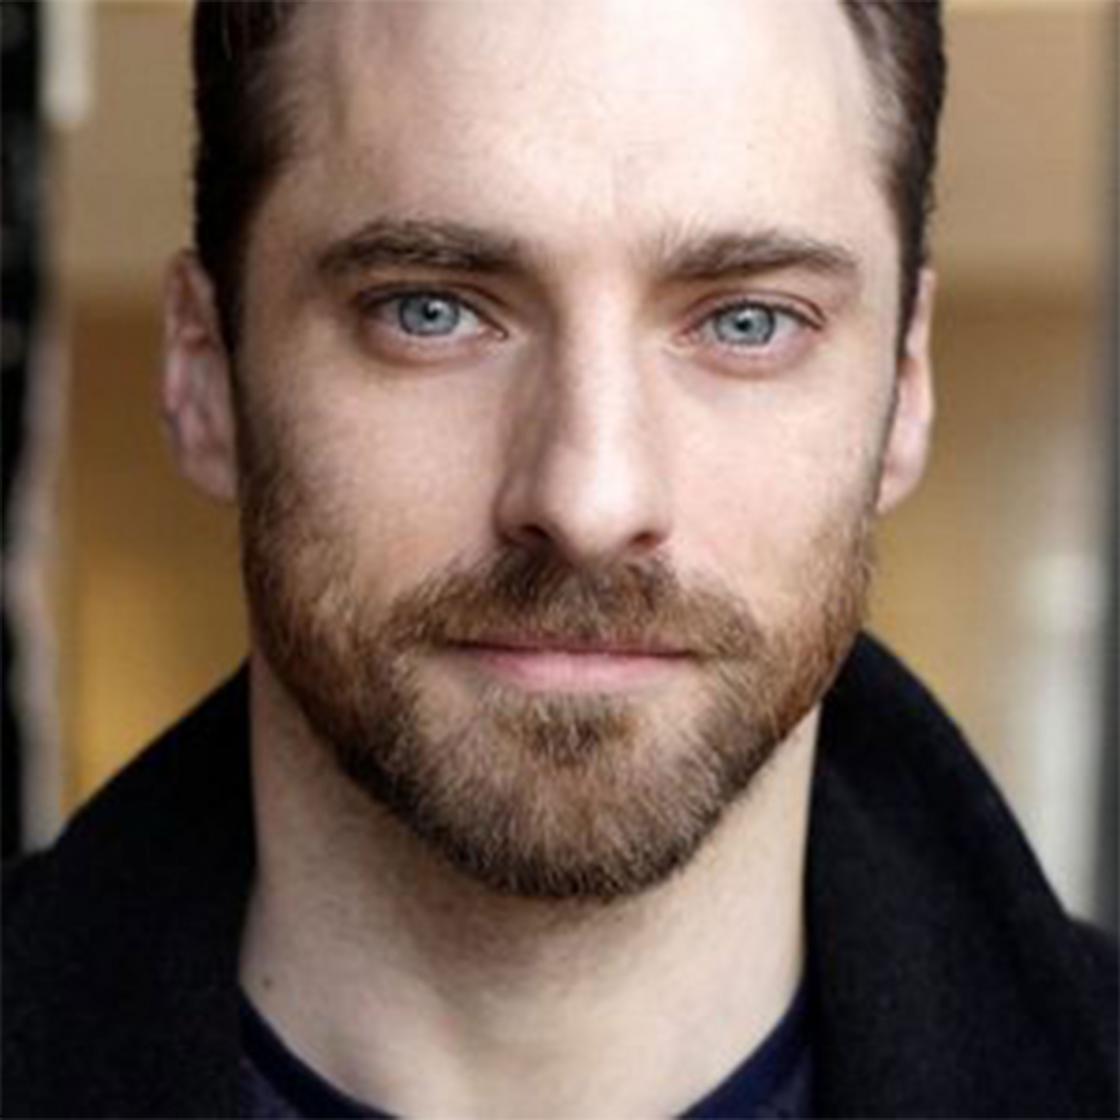 Richard Booth is a white male with dark brown hair and beard, he wears a black top